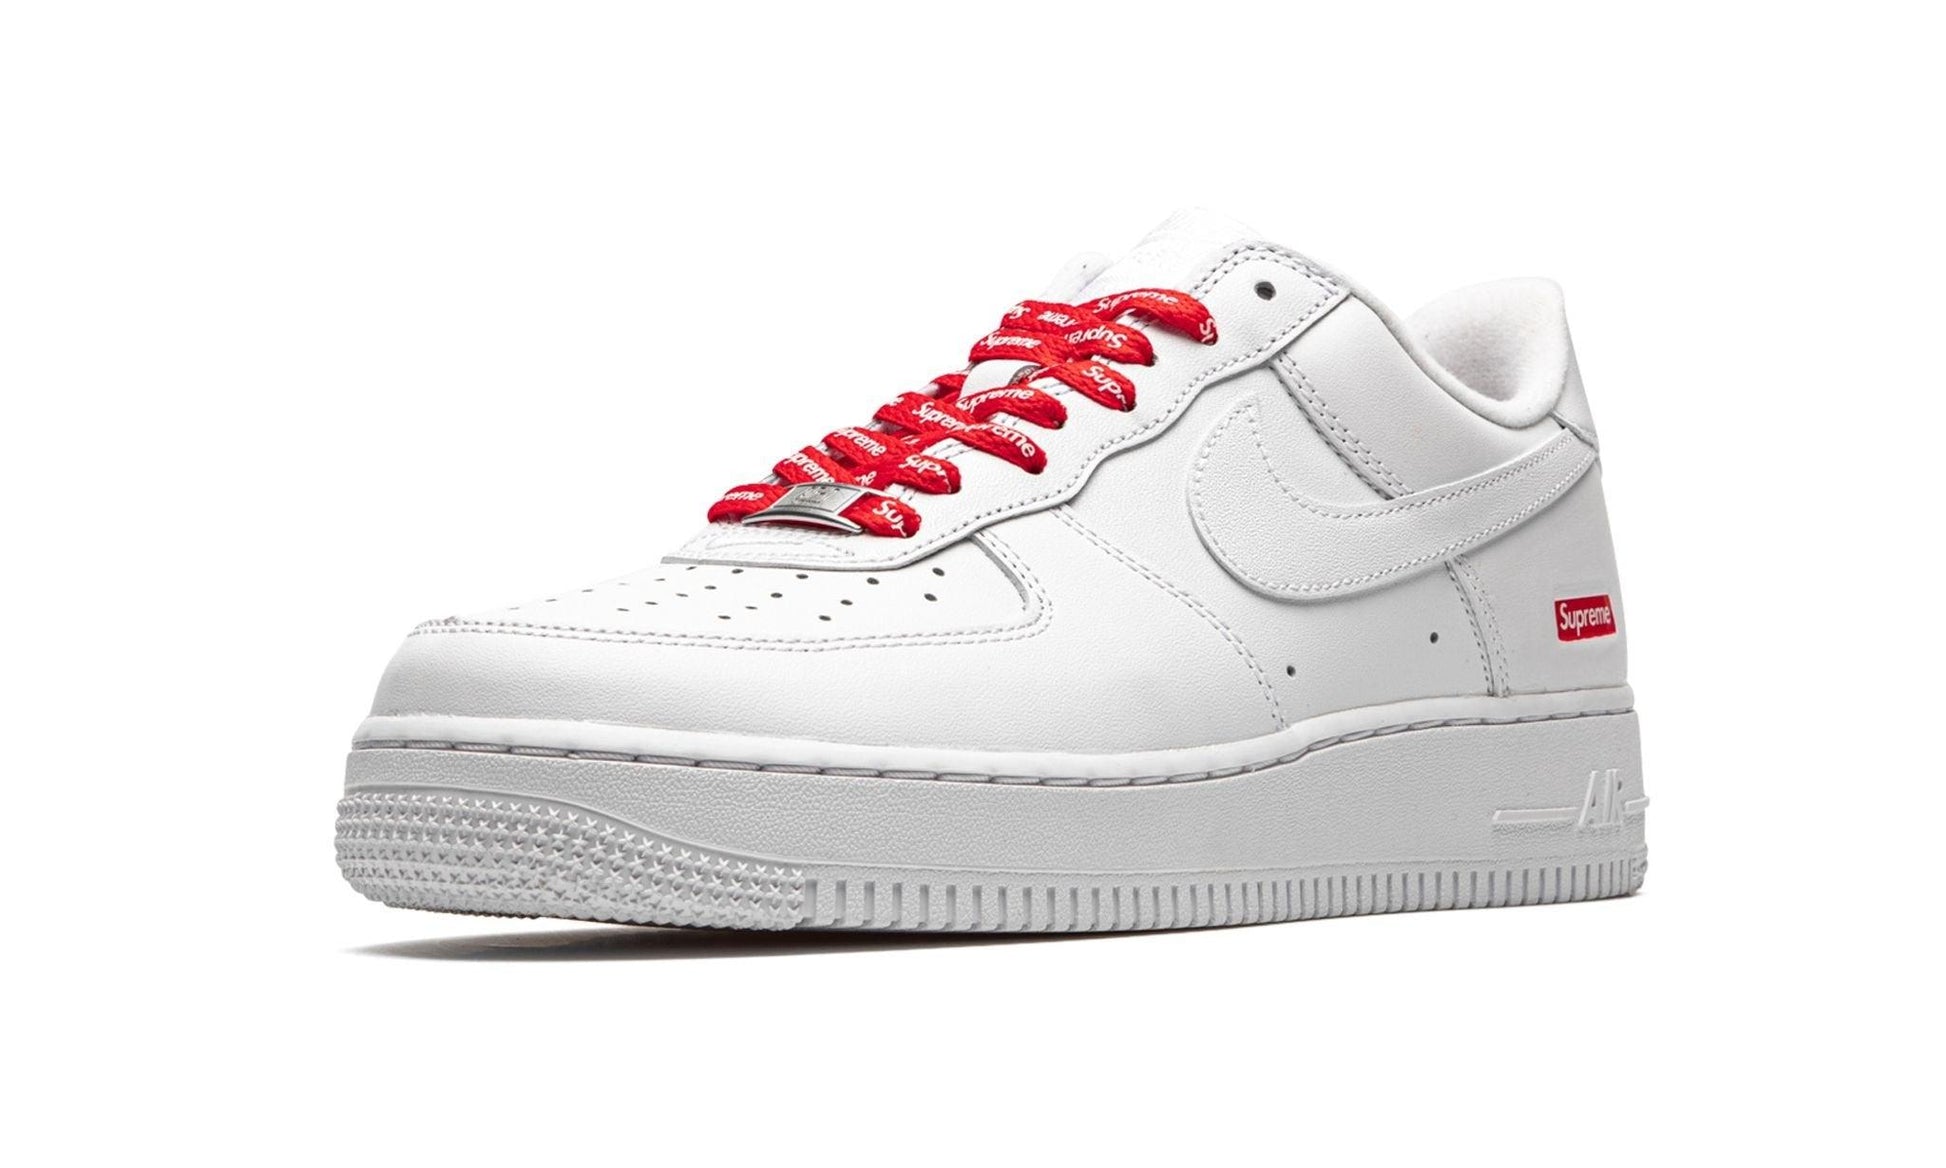 Air force 1 leather low trainers Nike x Supreme White size 44 EU